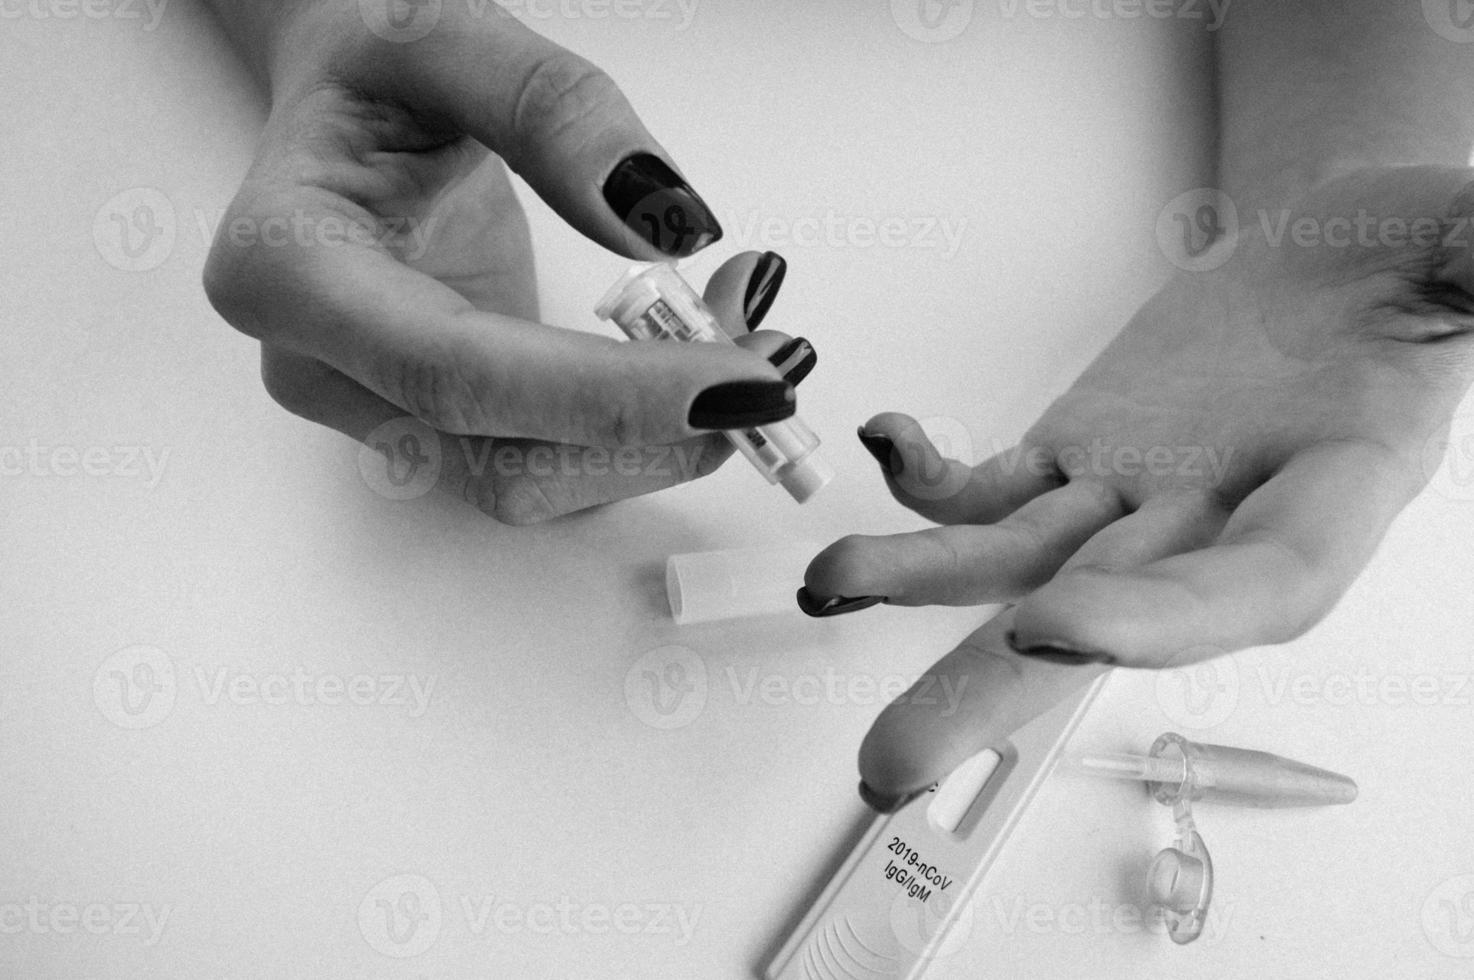 puncture of the finger with a lancet. quick blood test. express diagnostics. self-analysis, set for taking blood at home. fast finger puncture for blood sampling photo